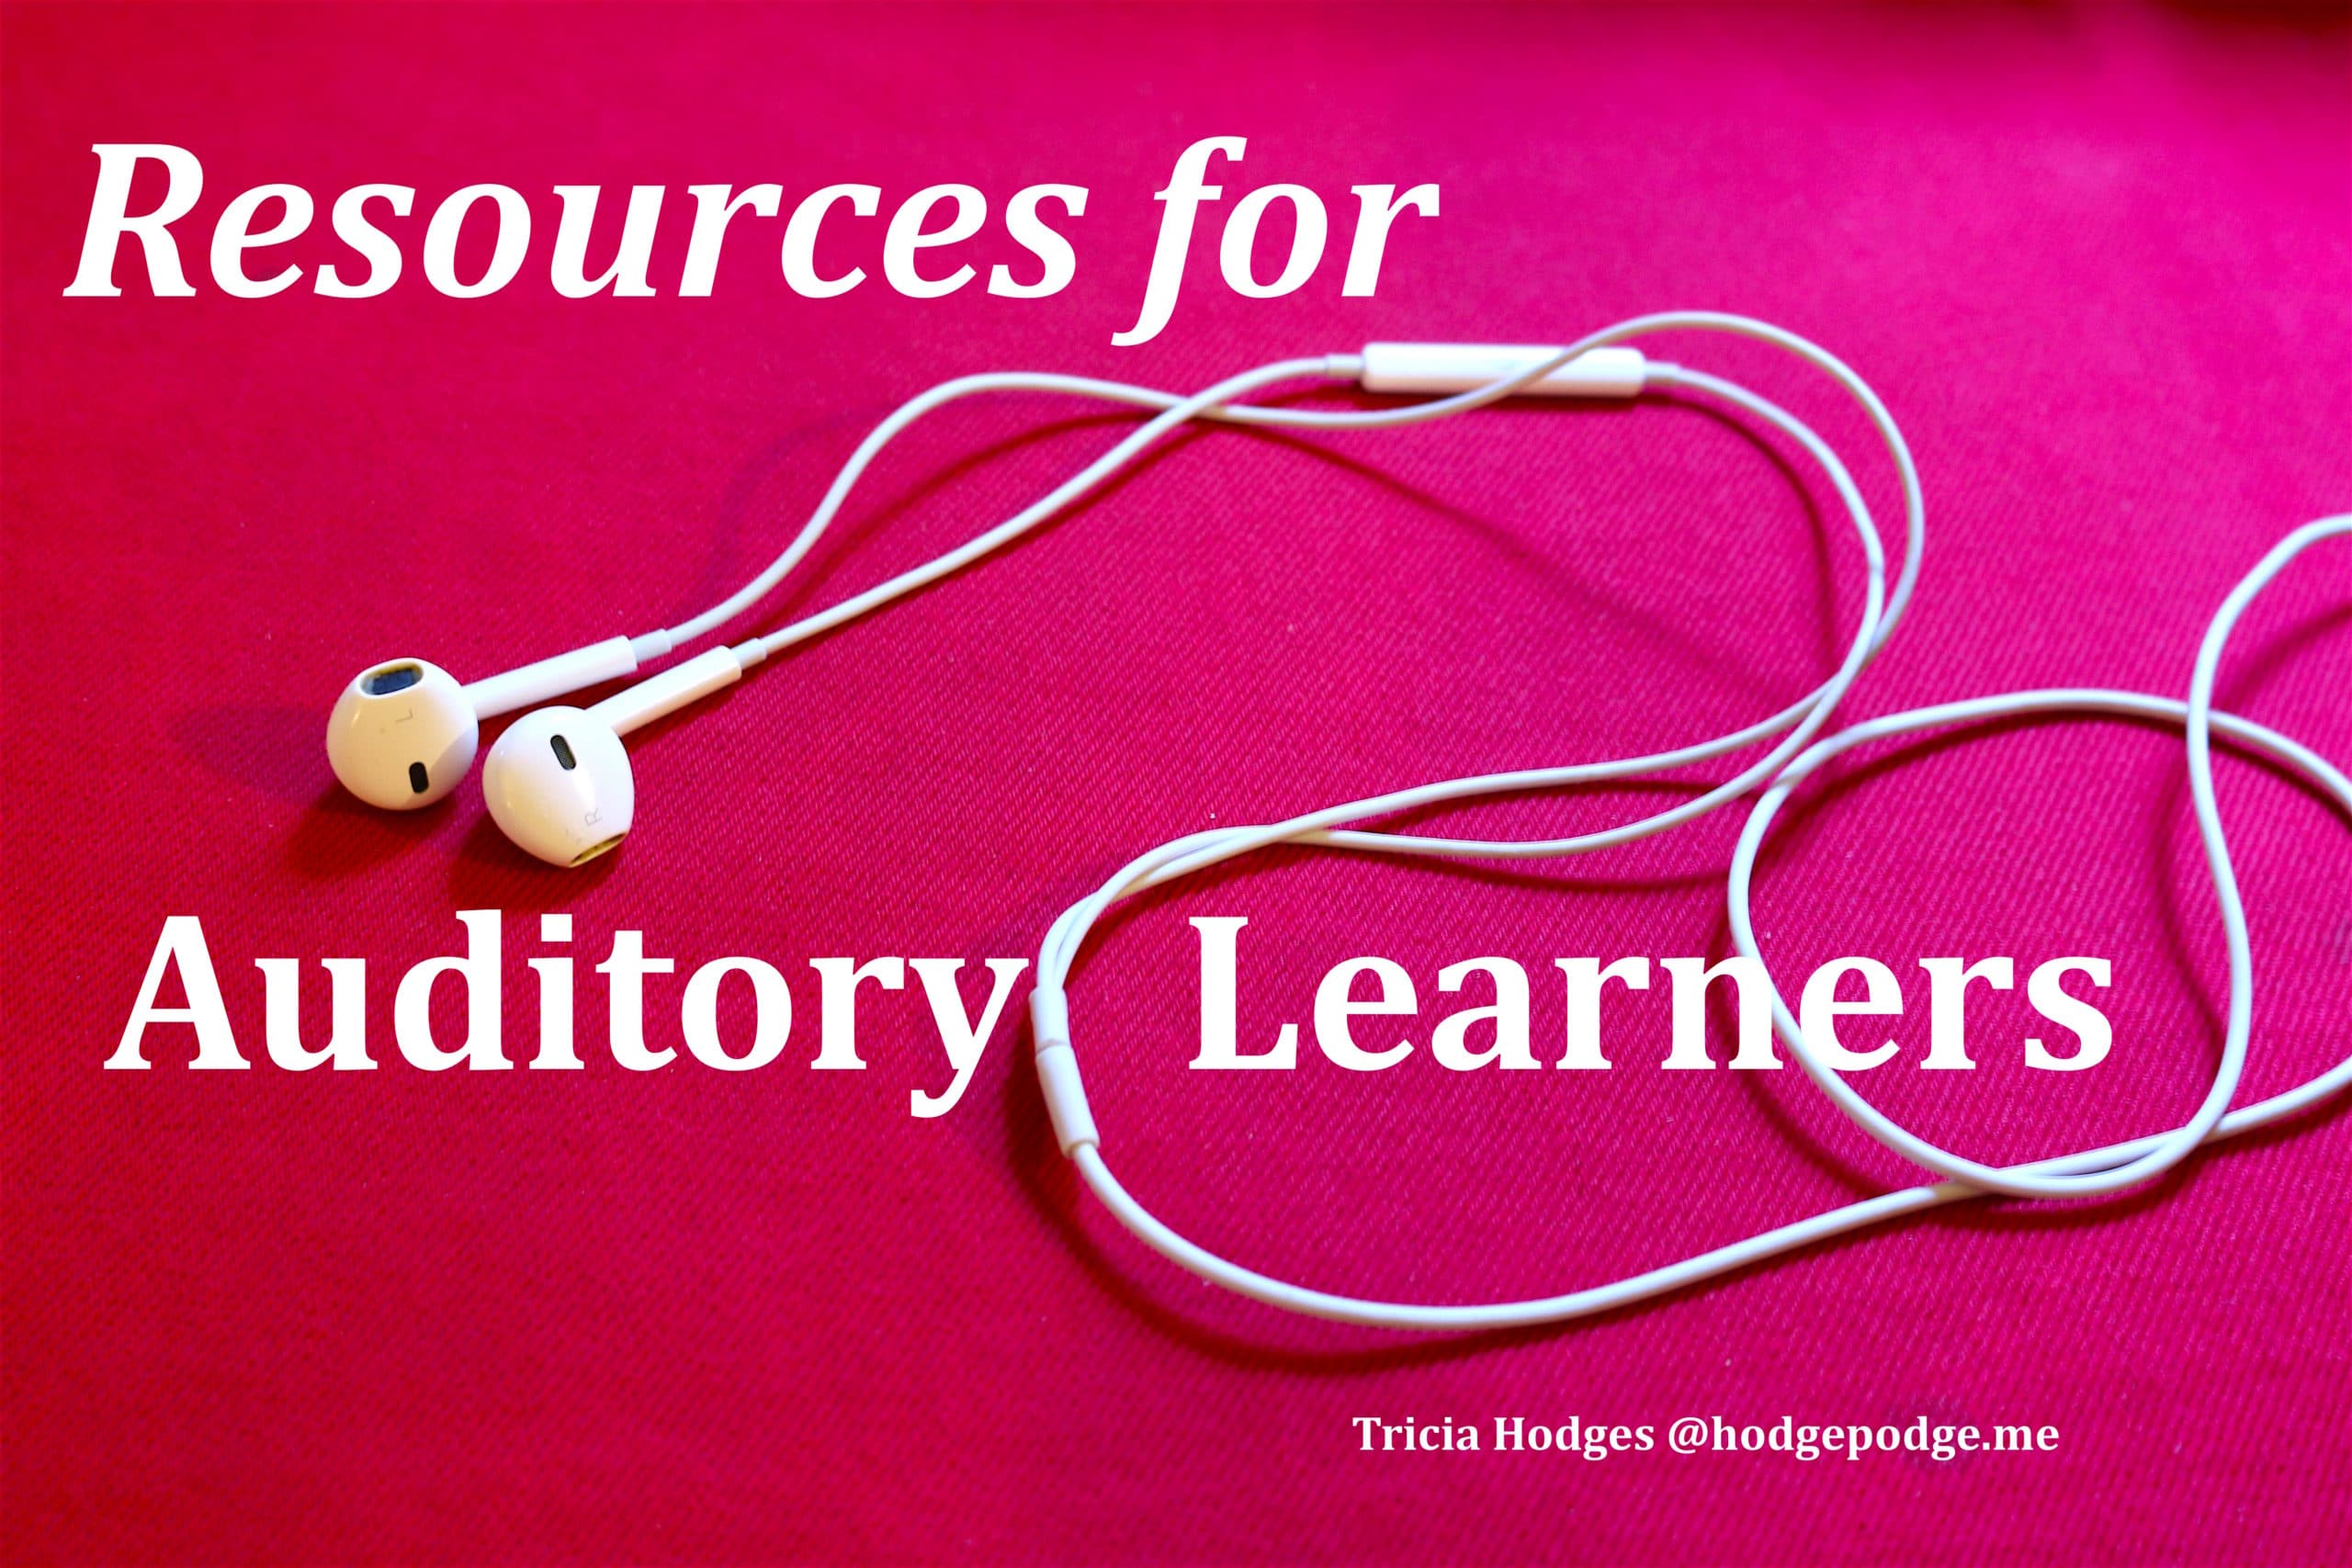 Homeschool Resources for Auditory Learners